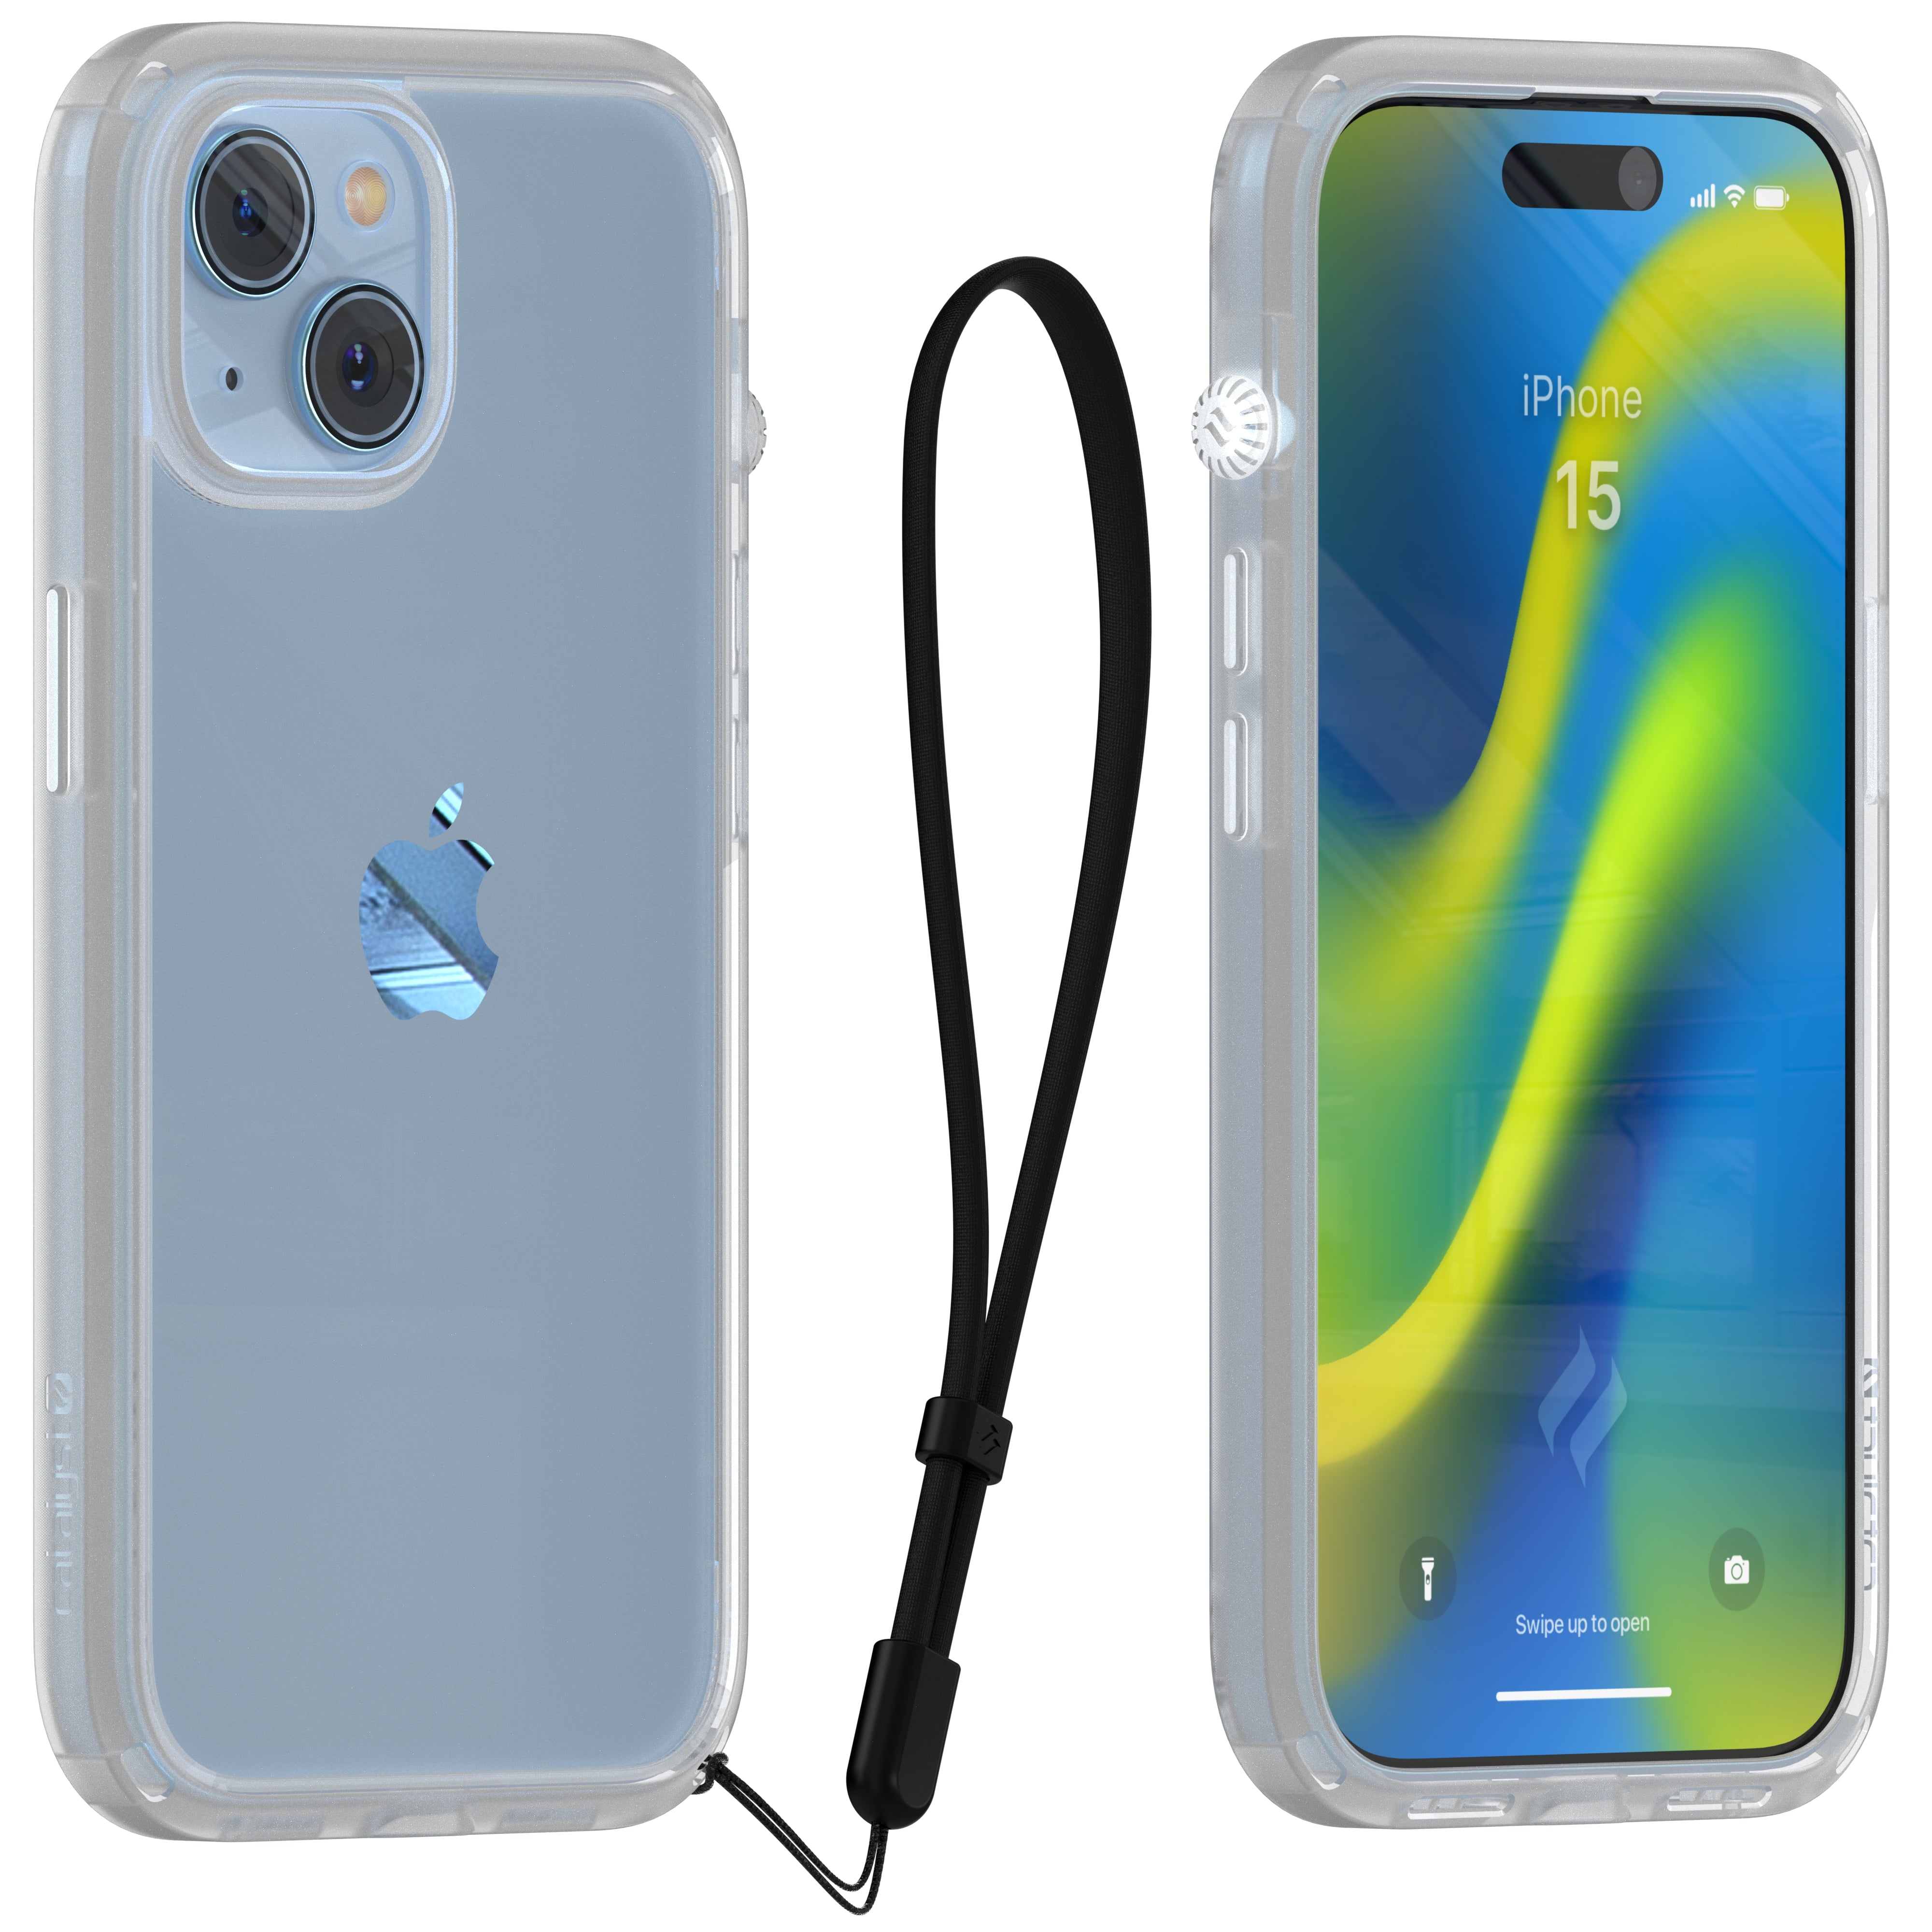 Catalyst iphone 15 series influence case iphone 15 in clear colorway showing the back and front view of the case with lanyard